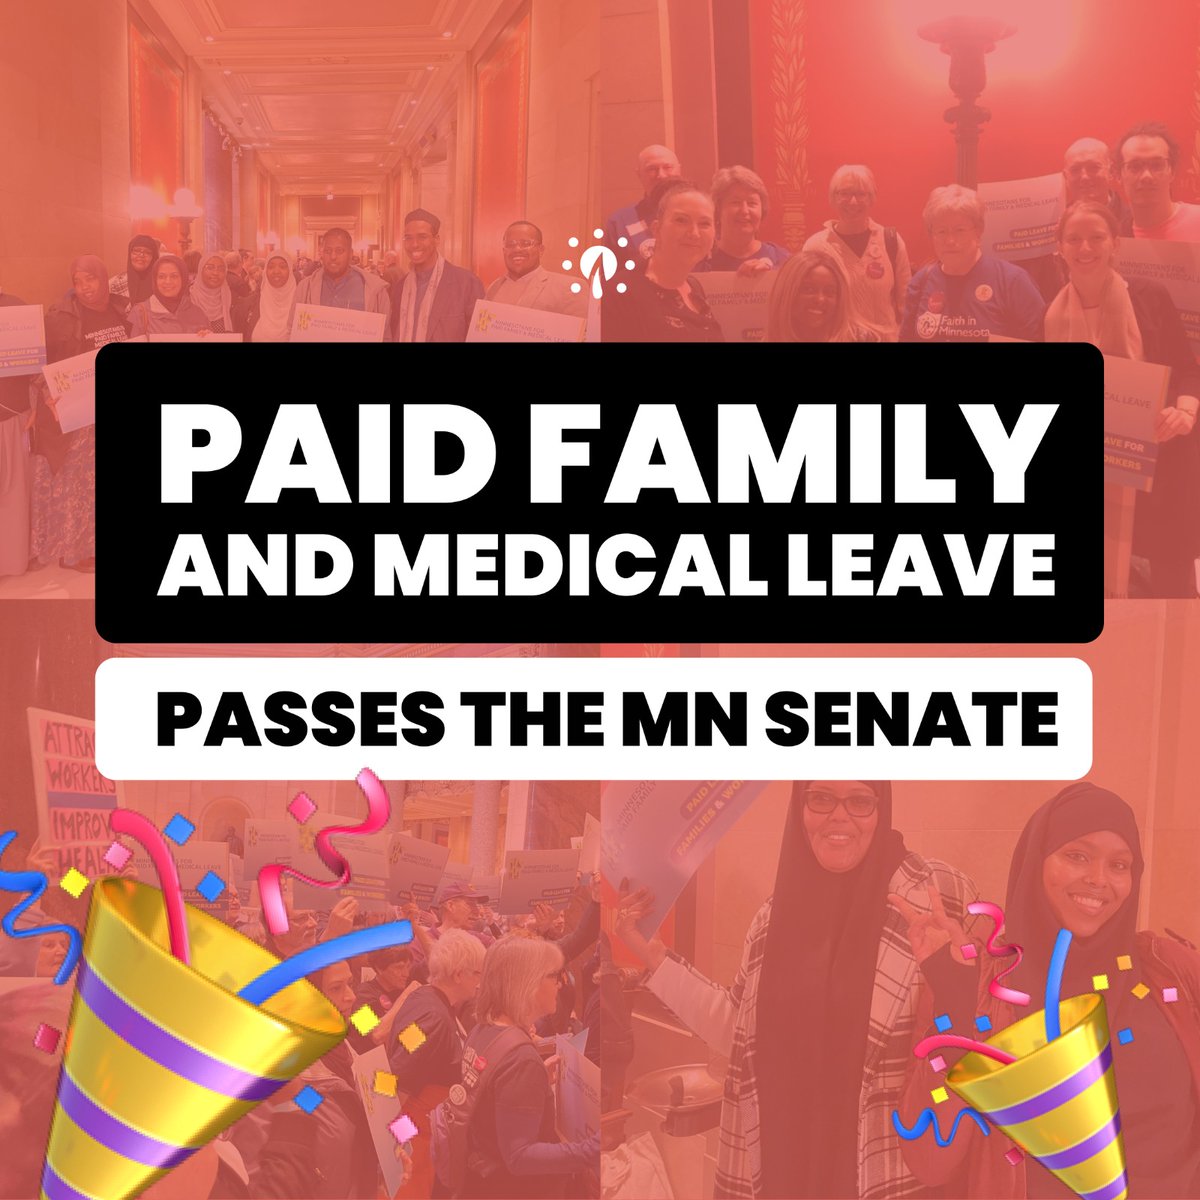 After 8 years, 20 committee hearings this year, and THOUSANDS of Minnesotans showing up this #MNLeg session...
 🎉 #PaidLeaveMN passed the Minnesota Senate! (1/4)